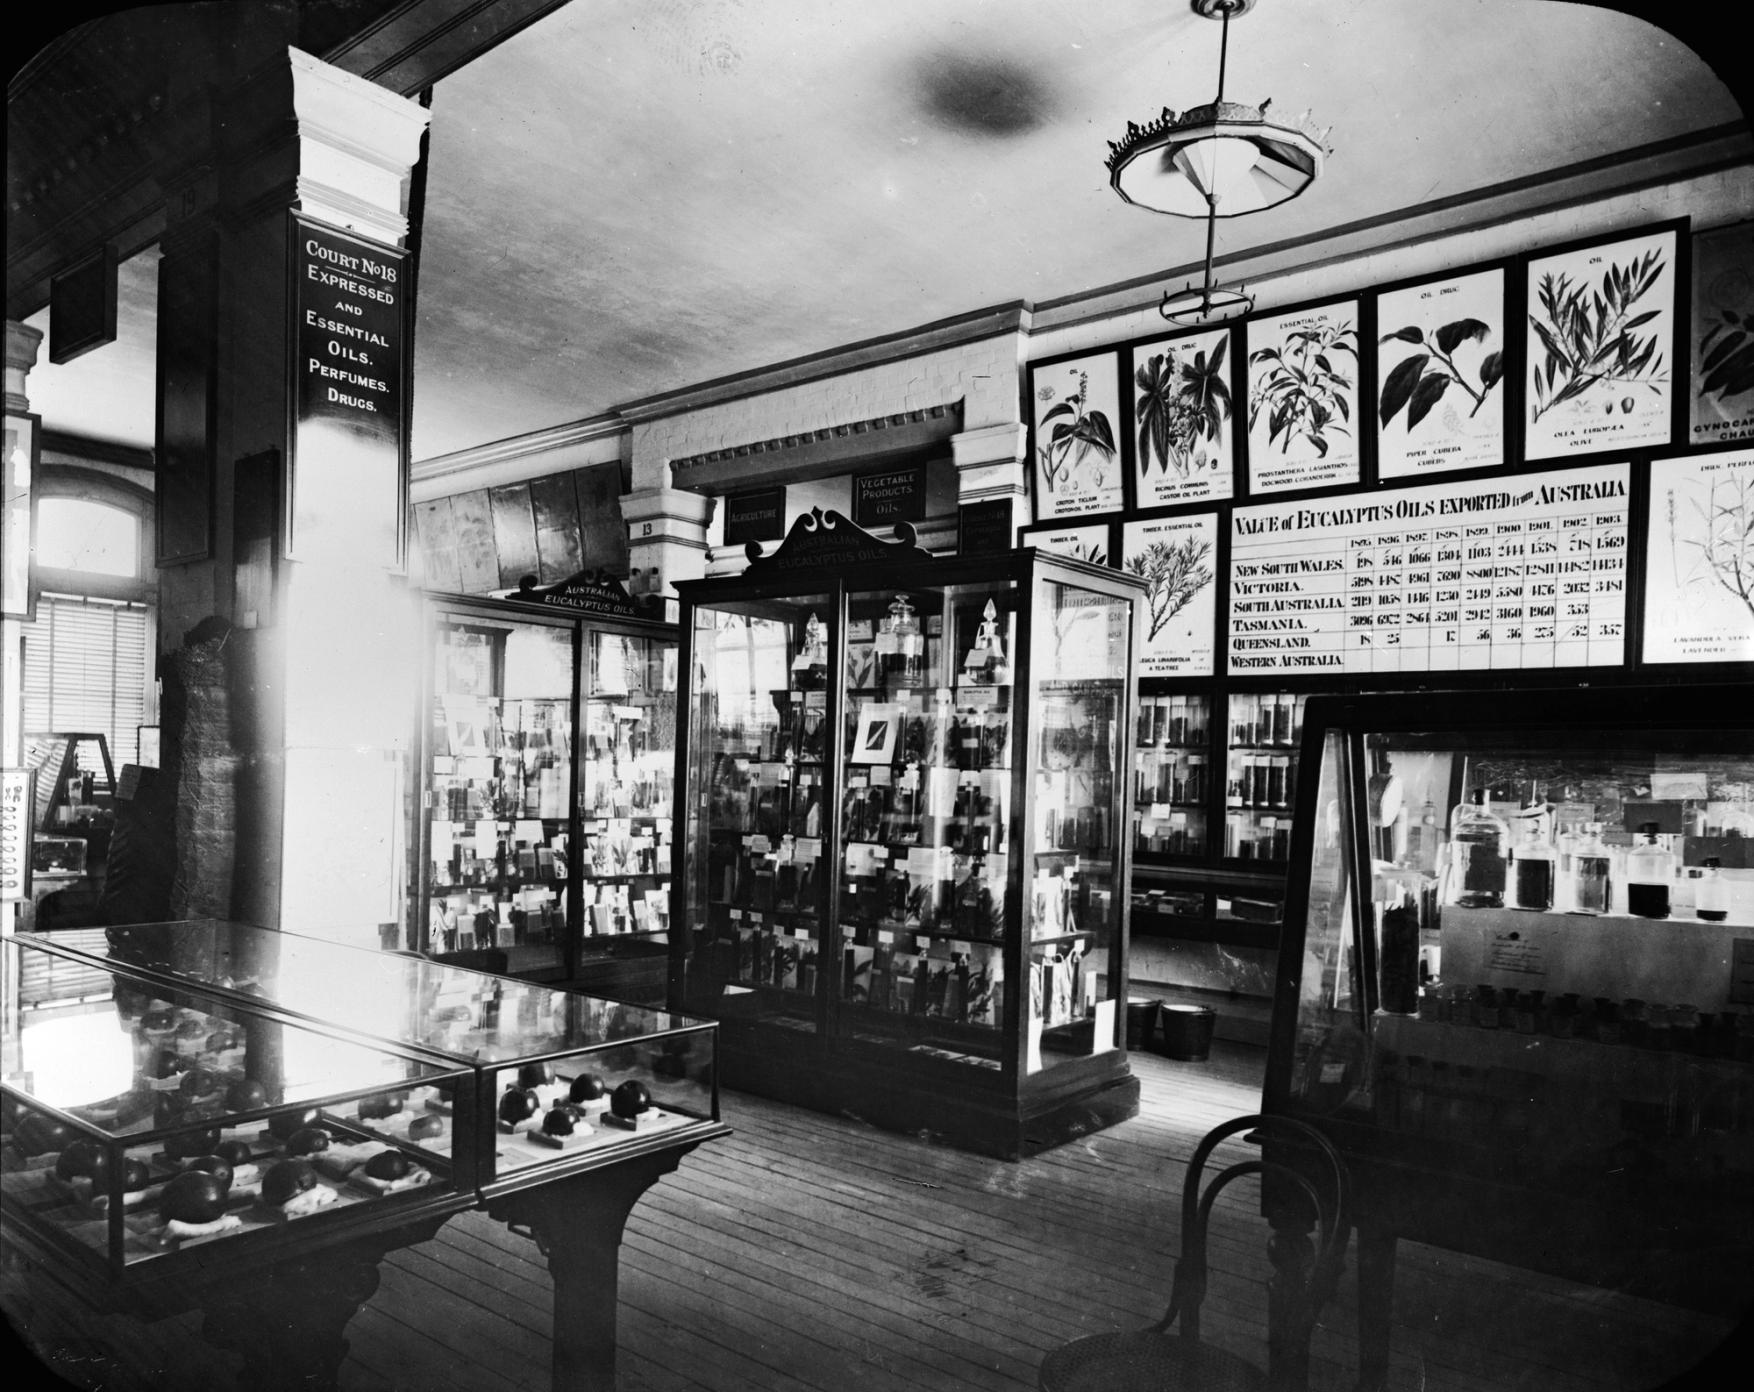 Black and white photograph of a museum display with glass cabinets, and drawings